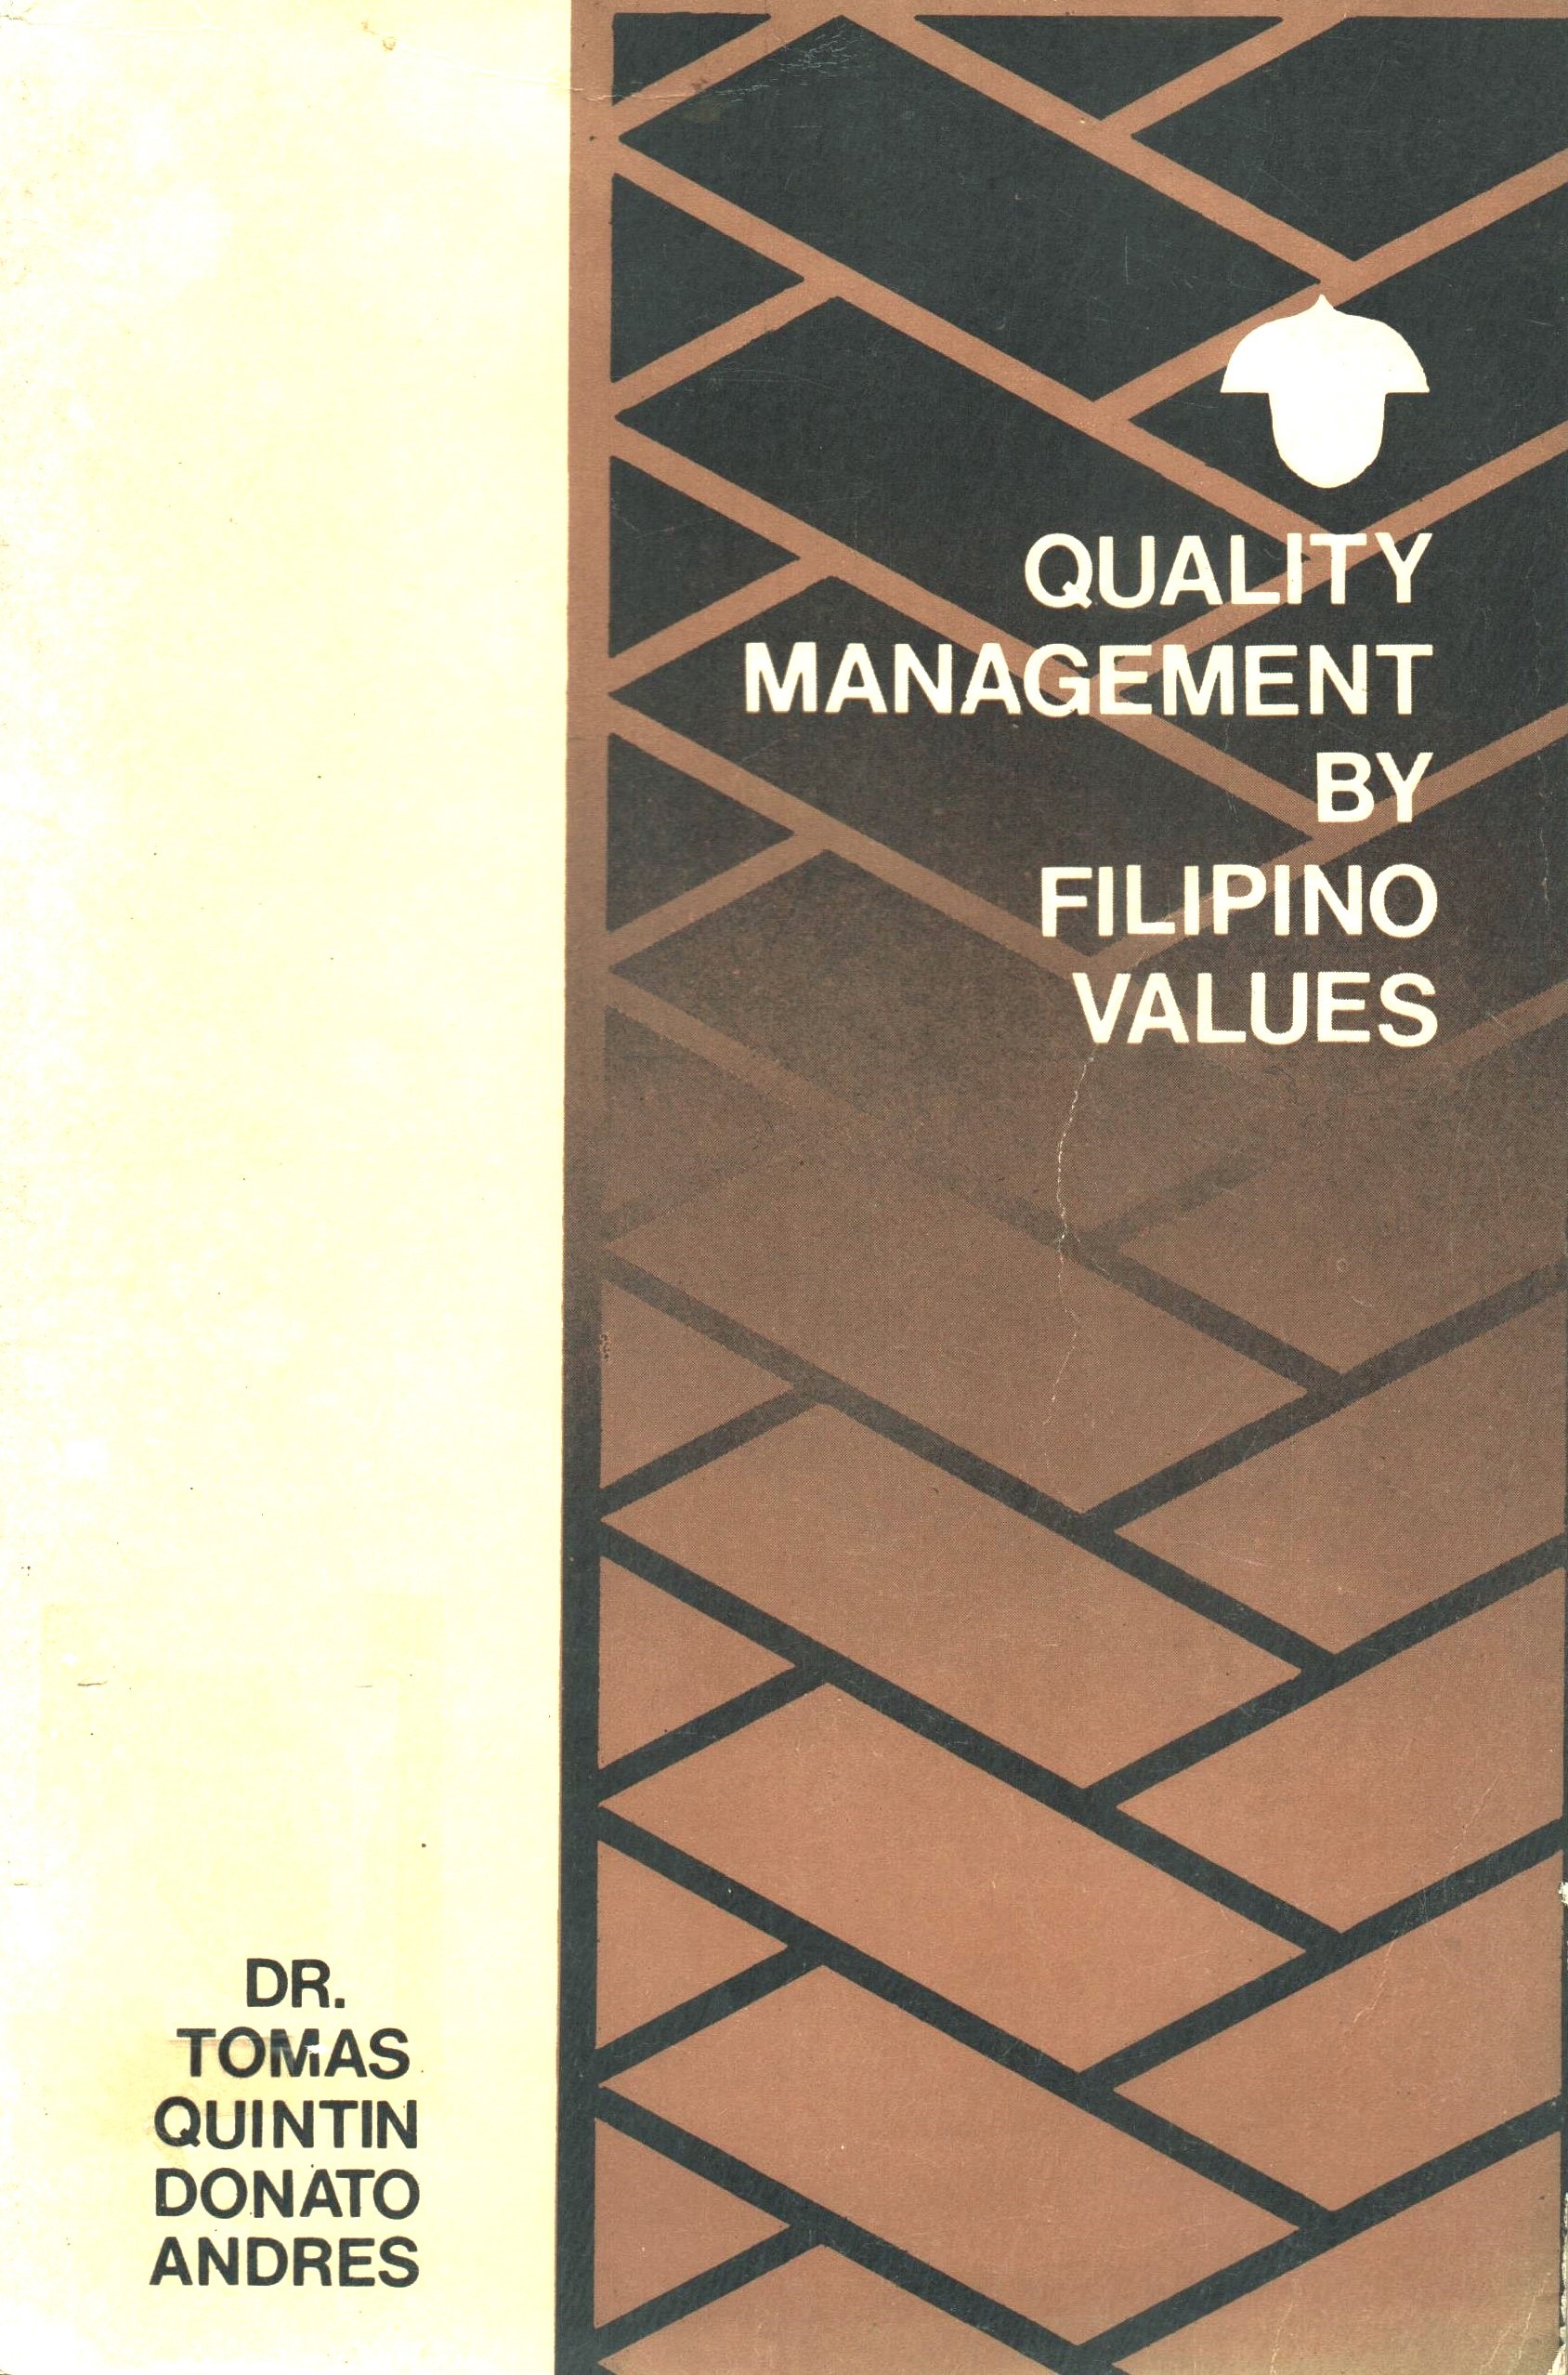 Quality management by Filipino values